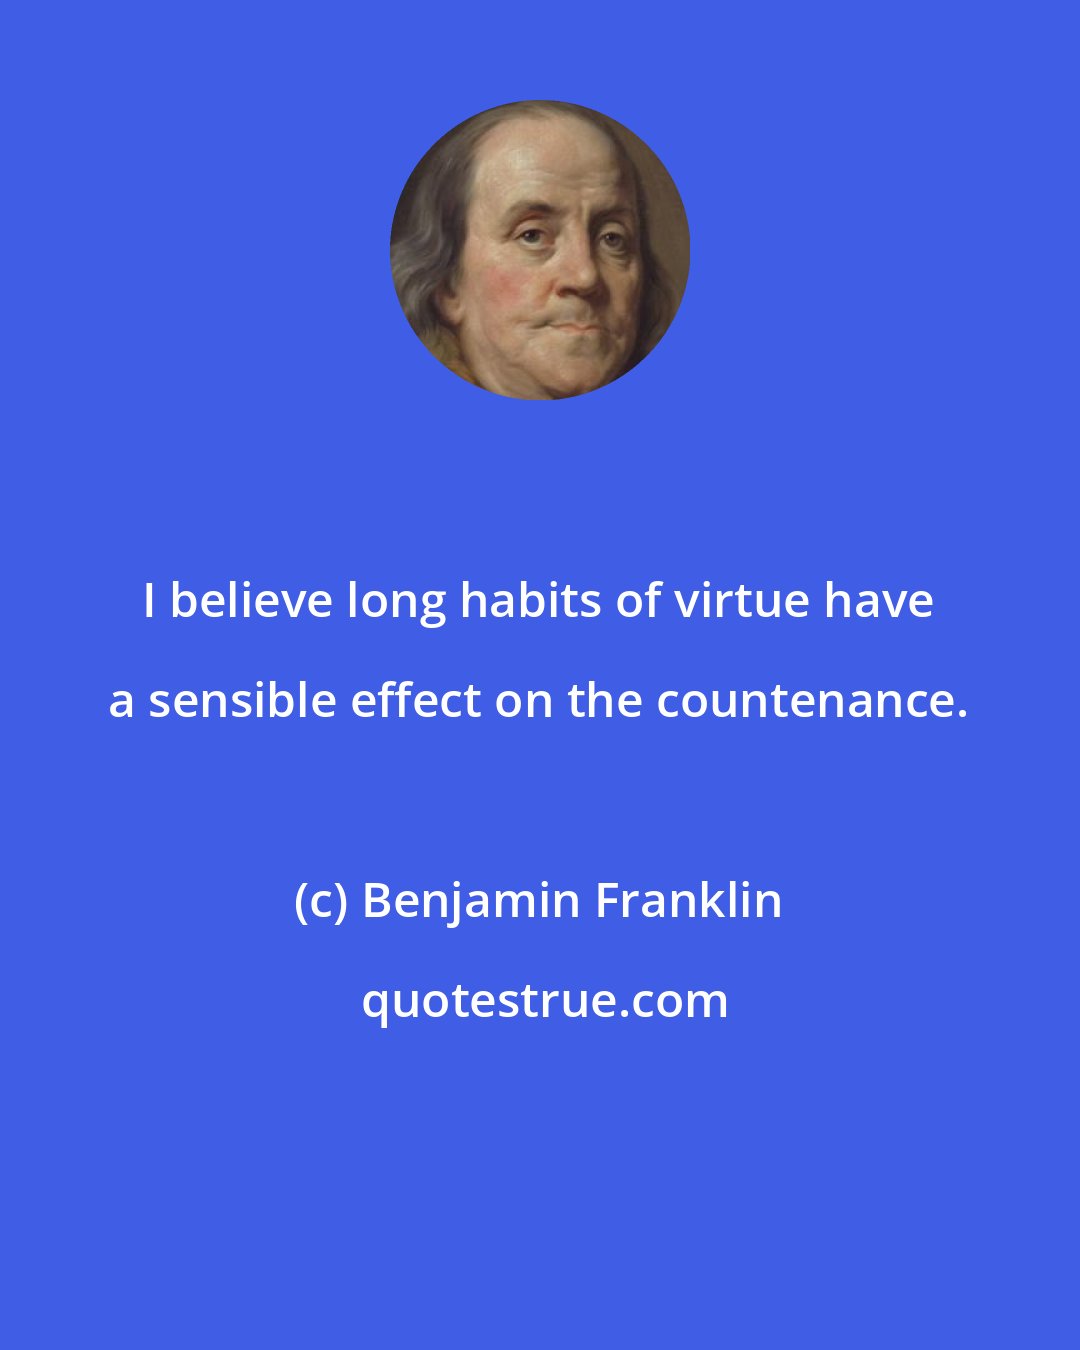 Benjamin Franklin: I believe long habits of virtue have a sensible effect on the countenance.